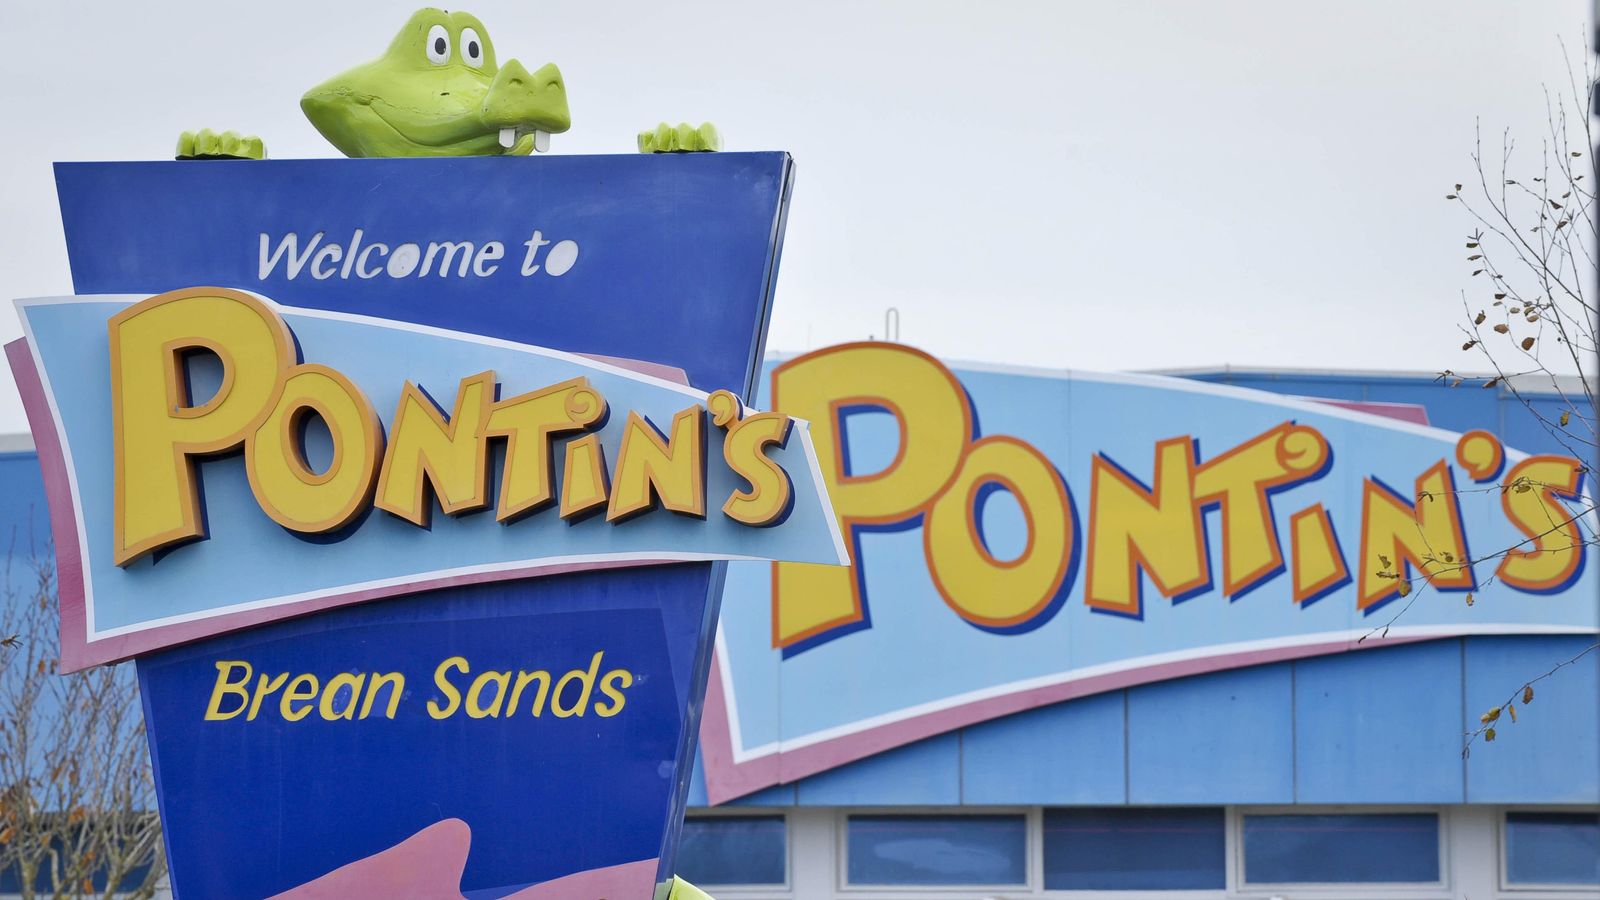 Pontins discriminated against Travellers by drawing up a list of 'undesirable' Irish surnames